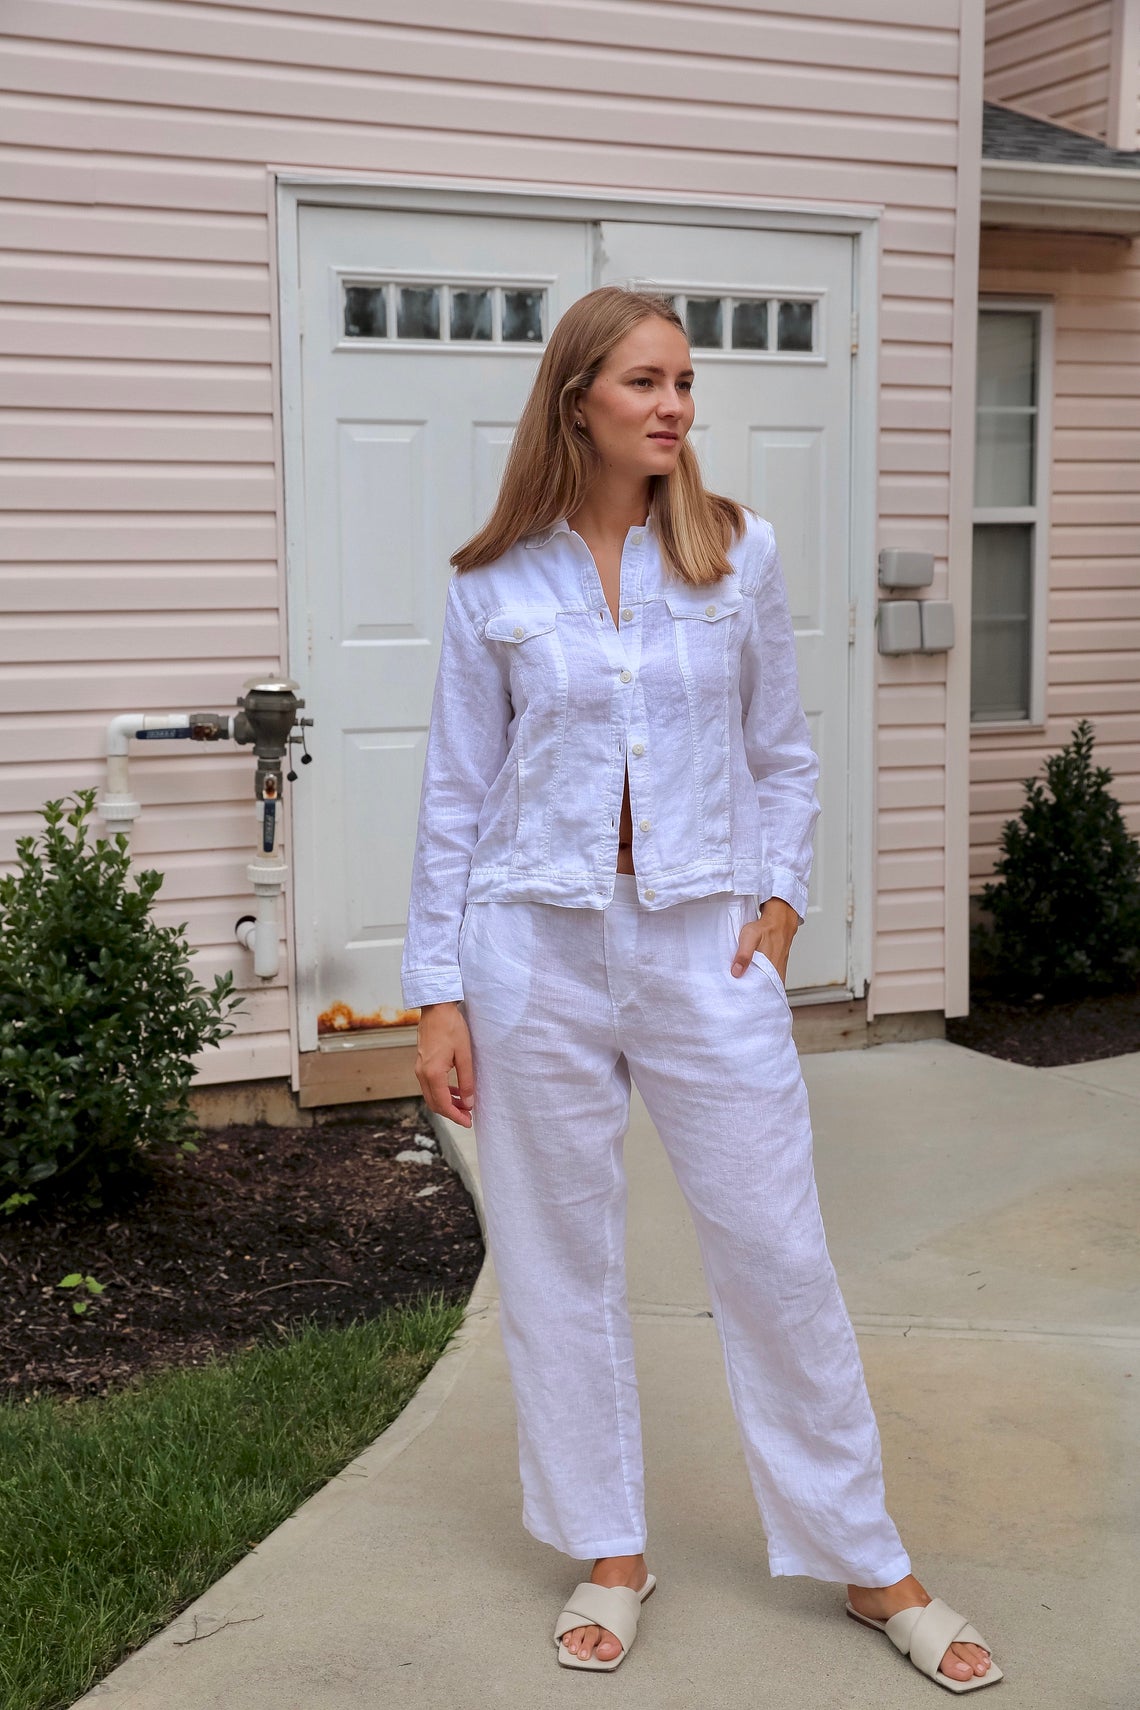 Fashion-forward woman in a breathable and comfortable linen crop jacket.